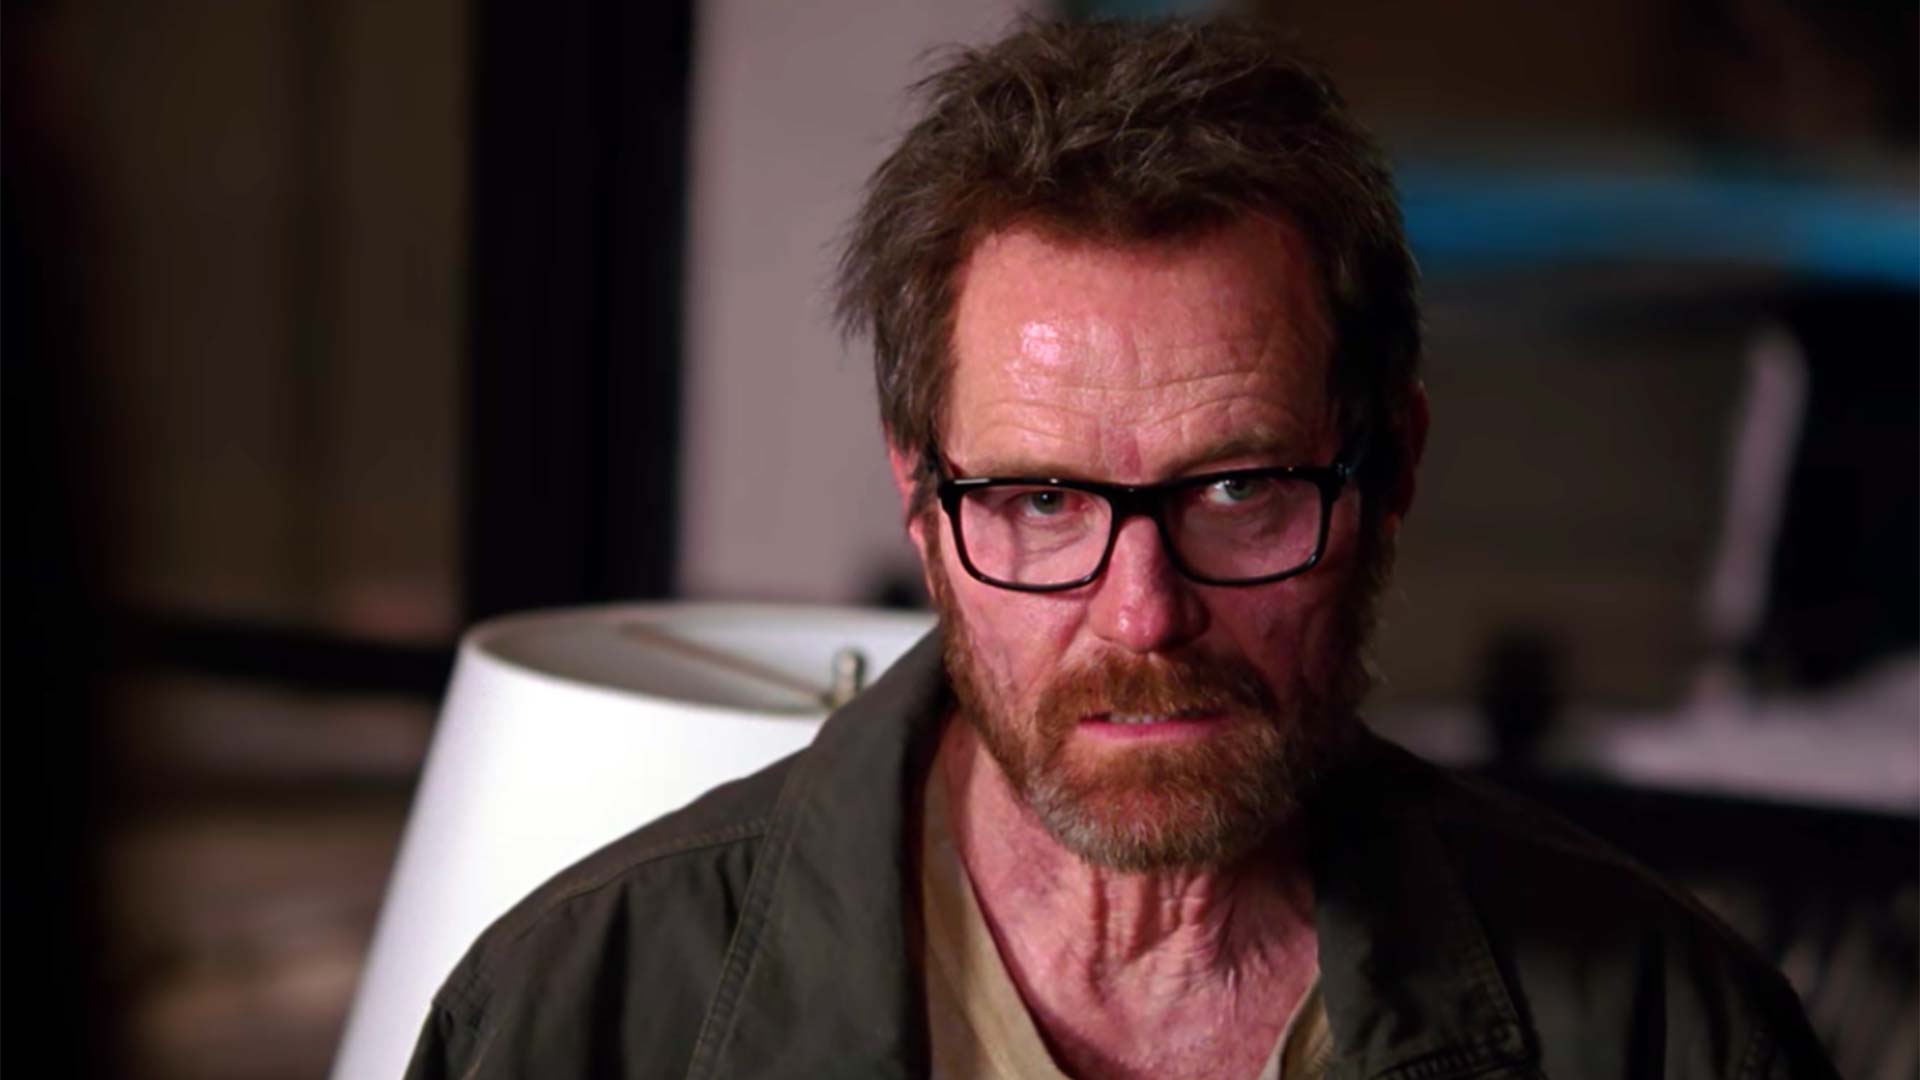 Best Breaking Bad Episodes For When You Need a Walt and Jesse Fix - Netflix  Tudum